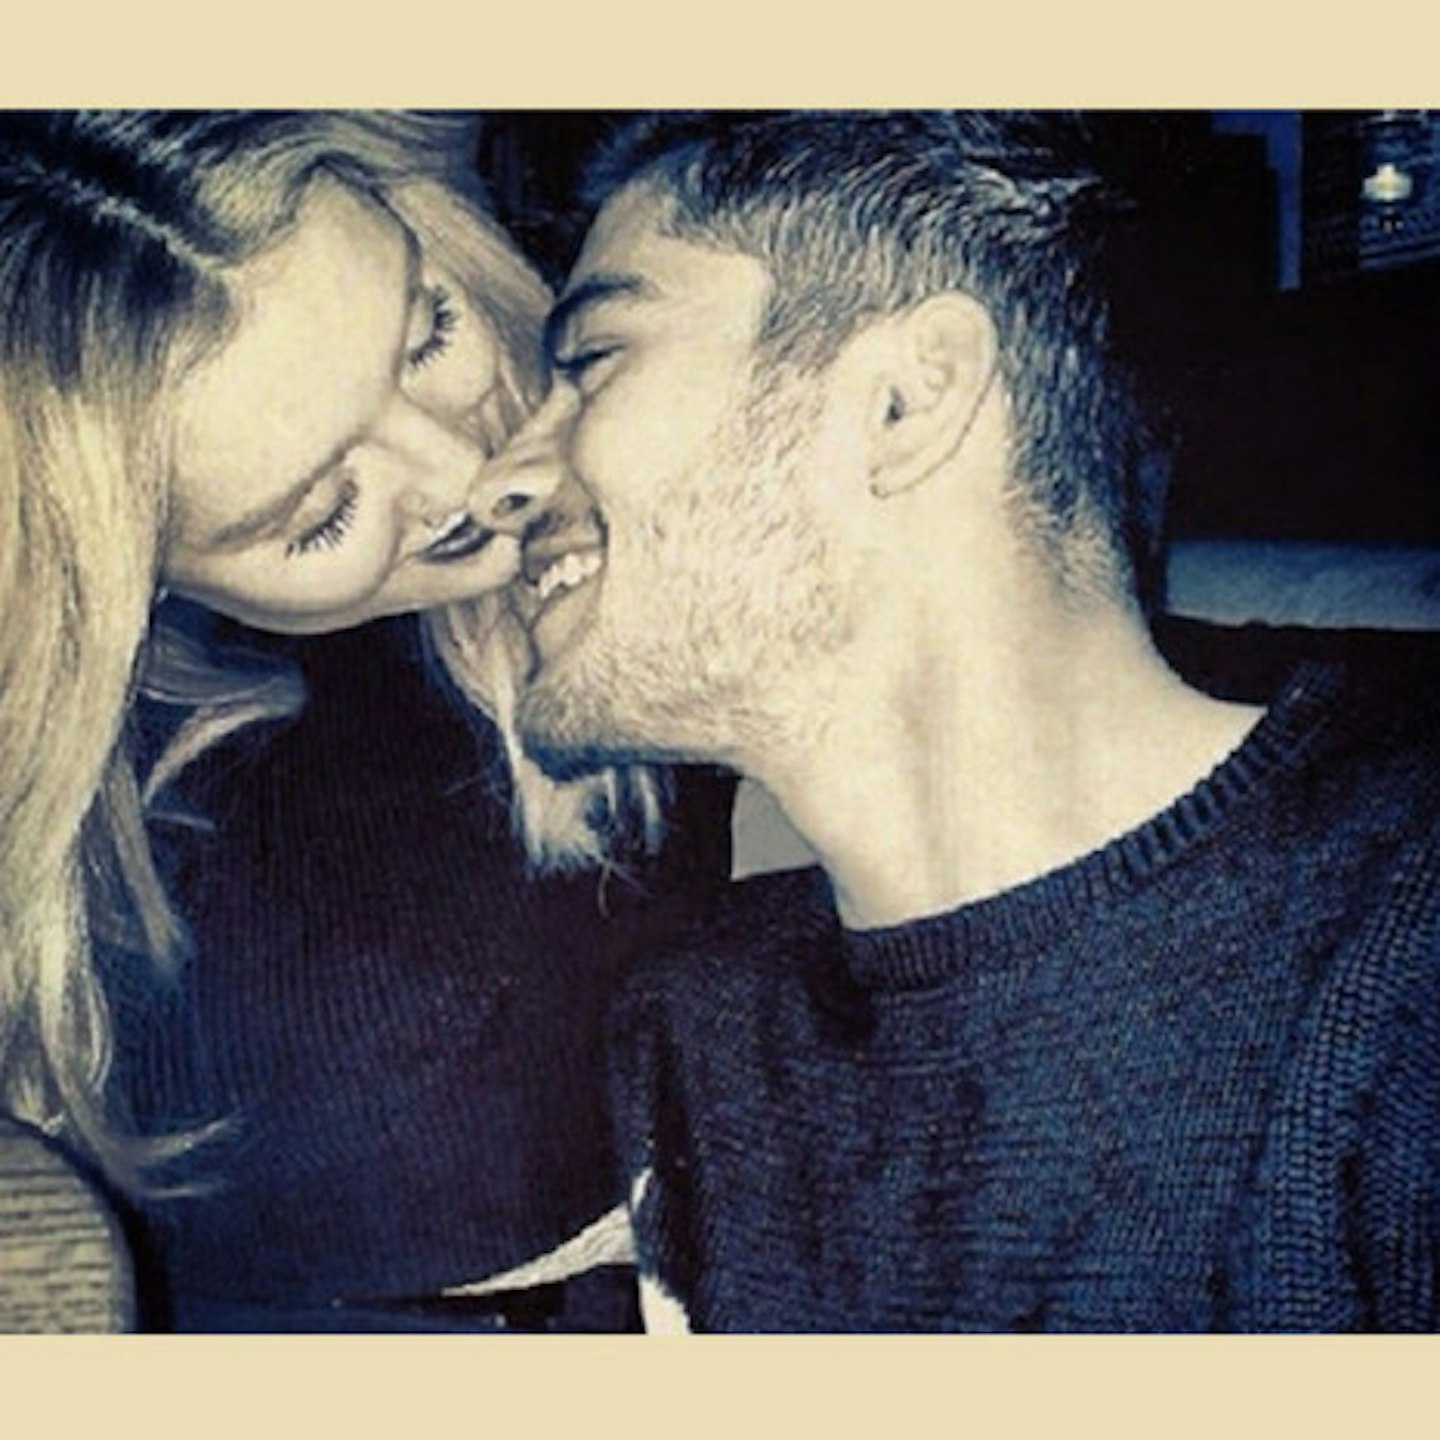 Zayn is said to have ended his three year engagement to Perrie with one text message